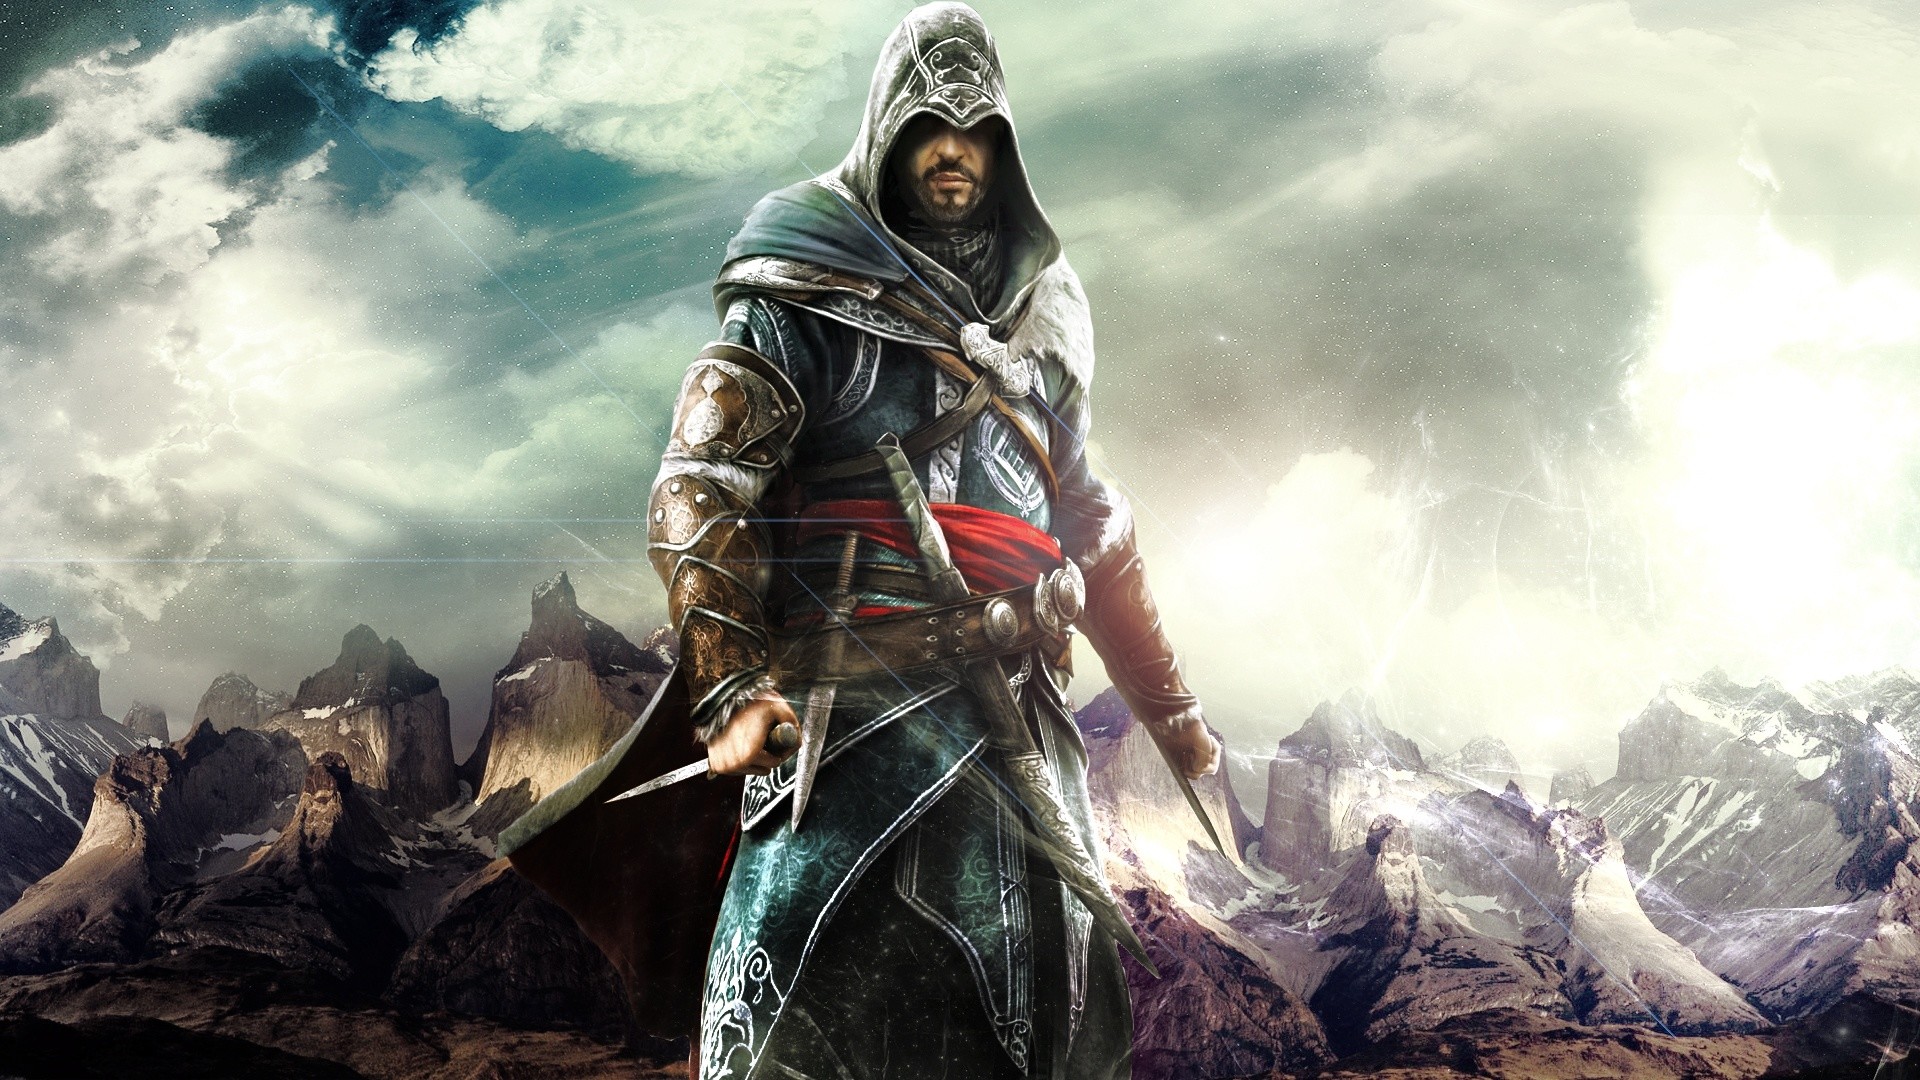 1920x1080 Assassins Creed Revelations Wallpapers HD Wallpapers 